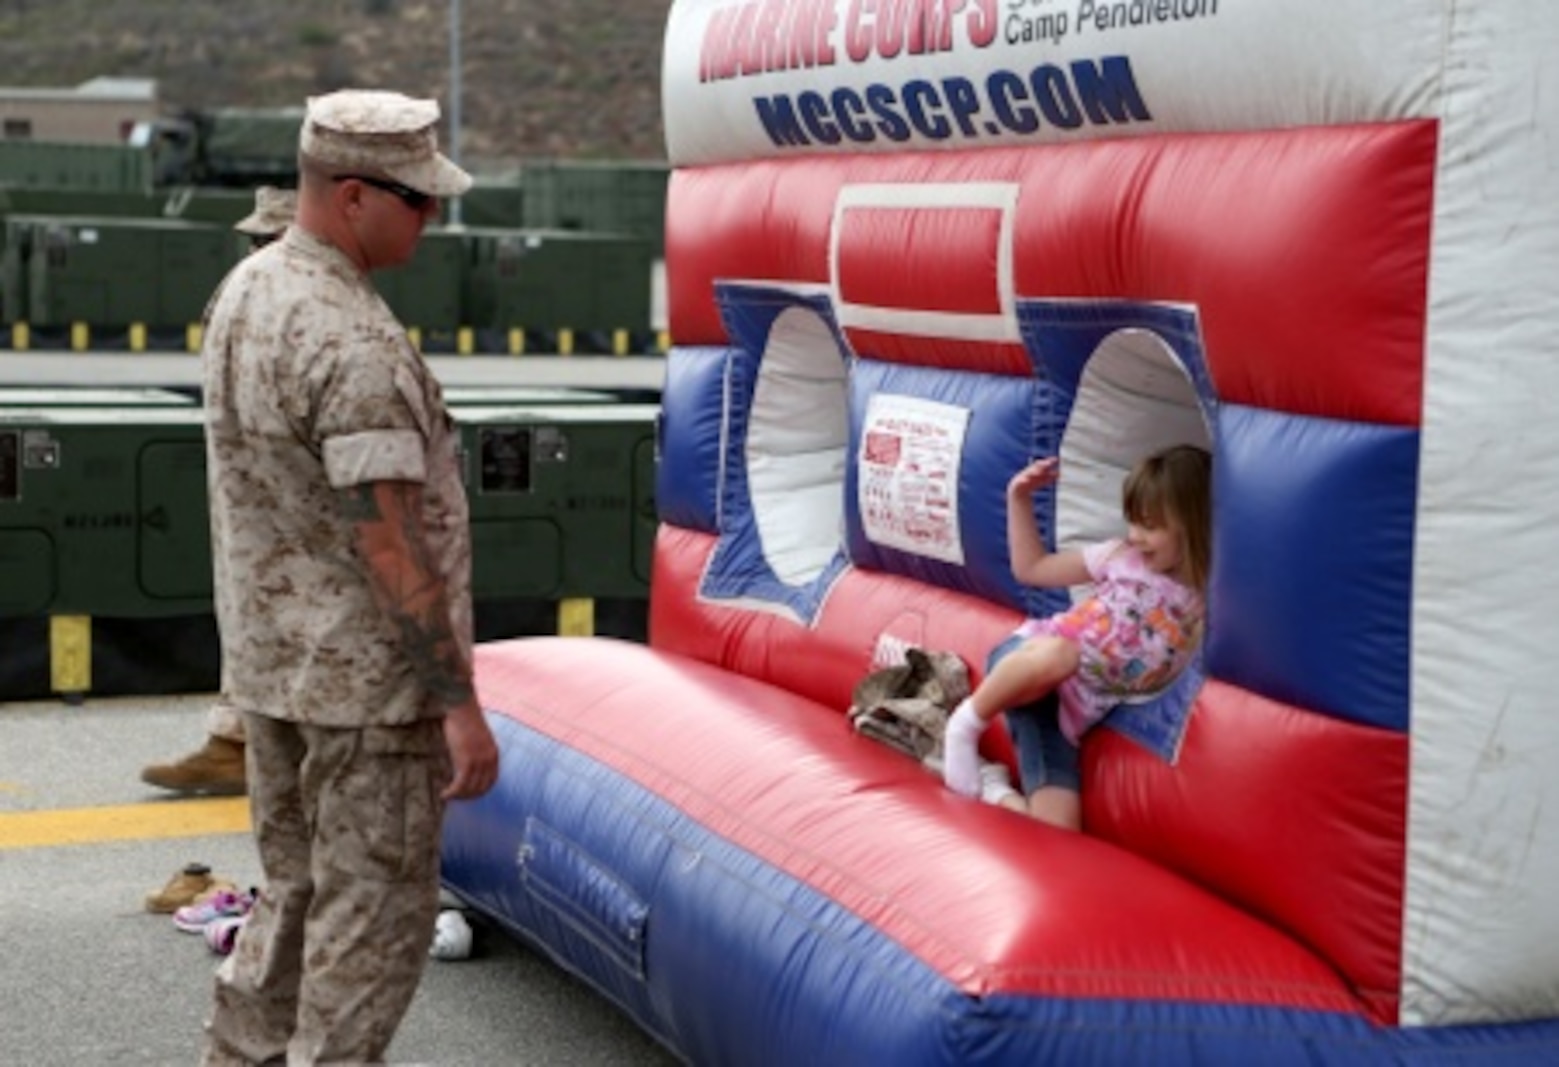 Gunnery Sgt. Jeremy Thrane, platoon sergeant, 7th Engineer Support Battalion, 1st Marine Logistics Group, gets called into a bouncy house by his daughter, Elleanna, at a family day celebration for Marines and Sailors of 7th ESB aboard Camp Pendleton, Calif., July 10, 2015. Included in the celebration were bouncy houses and displays that allowed them to look at things like sniper rifles, armored vehicles and Explosive Ordnance Disposal gear.